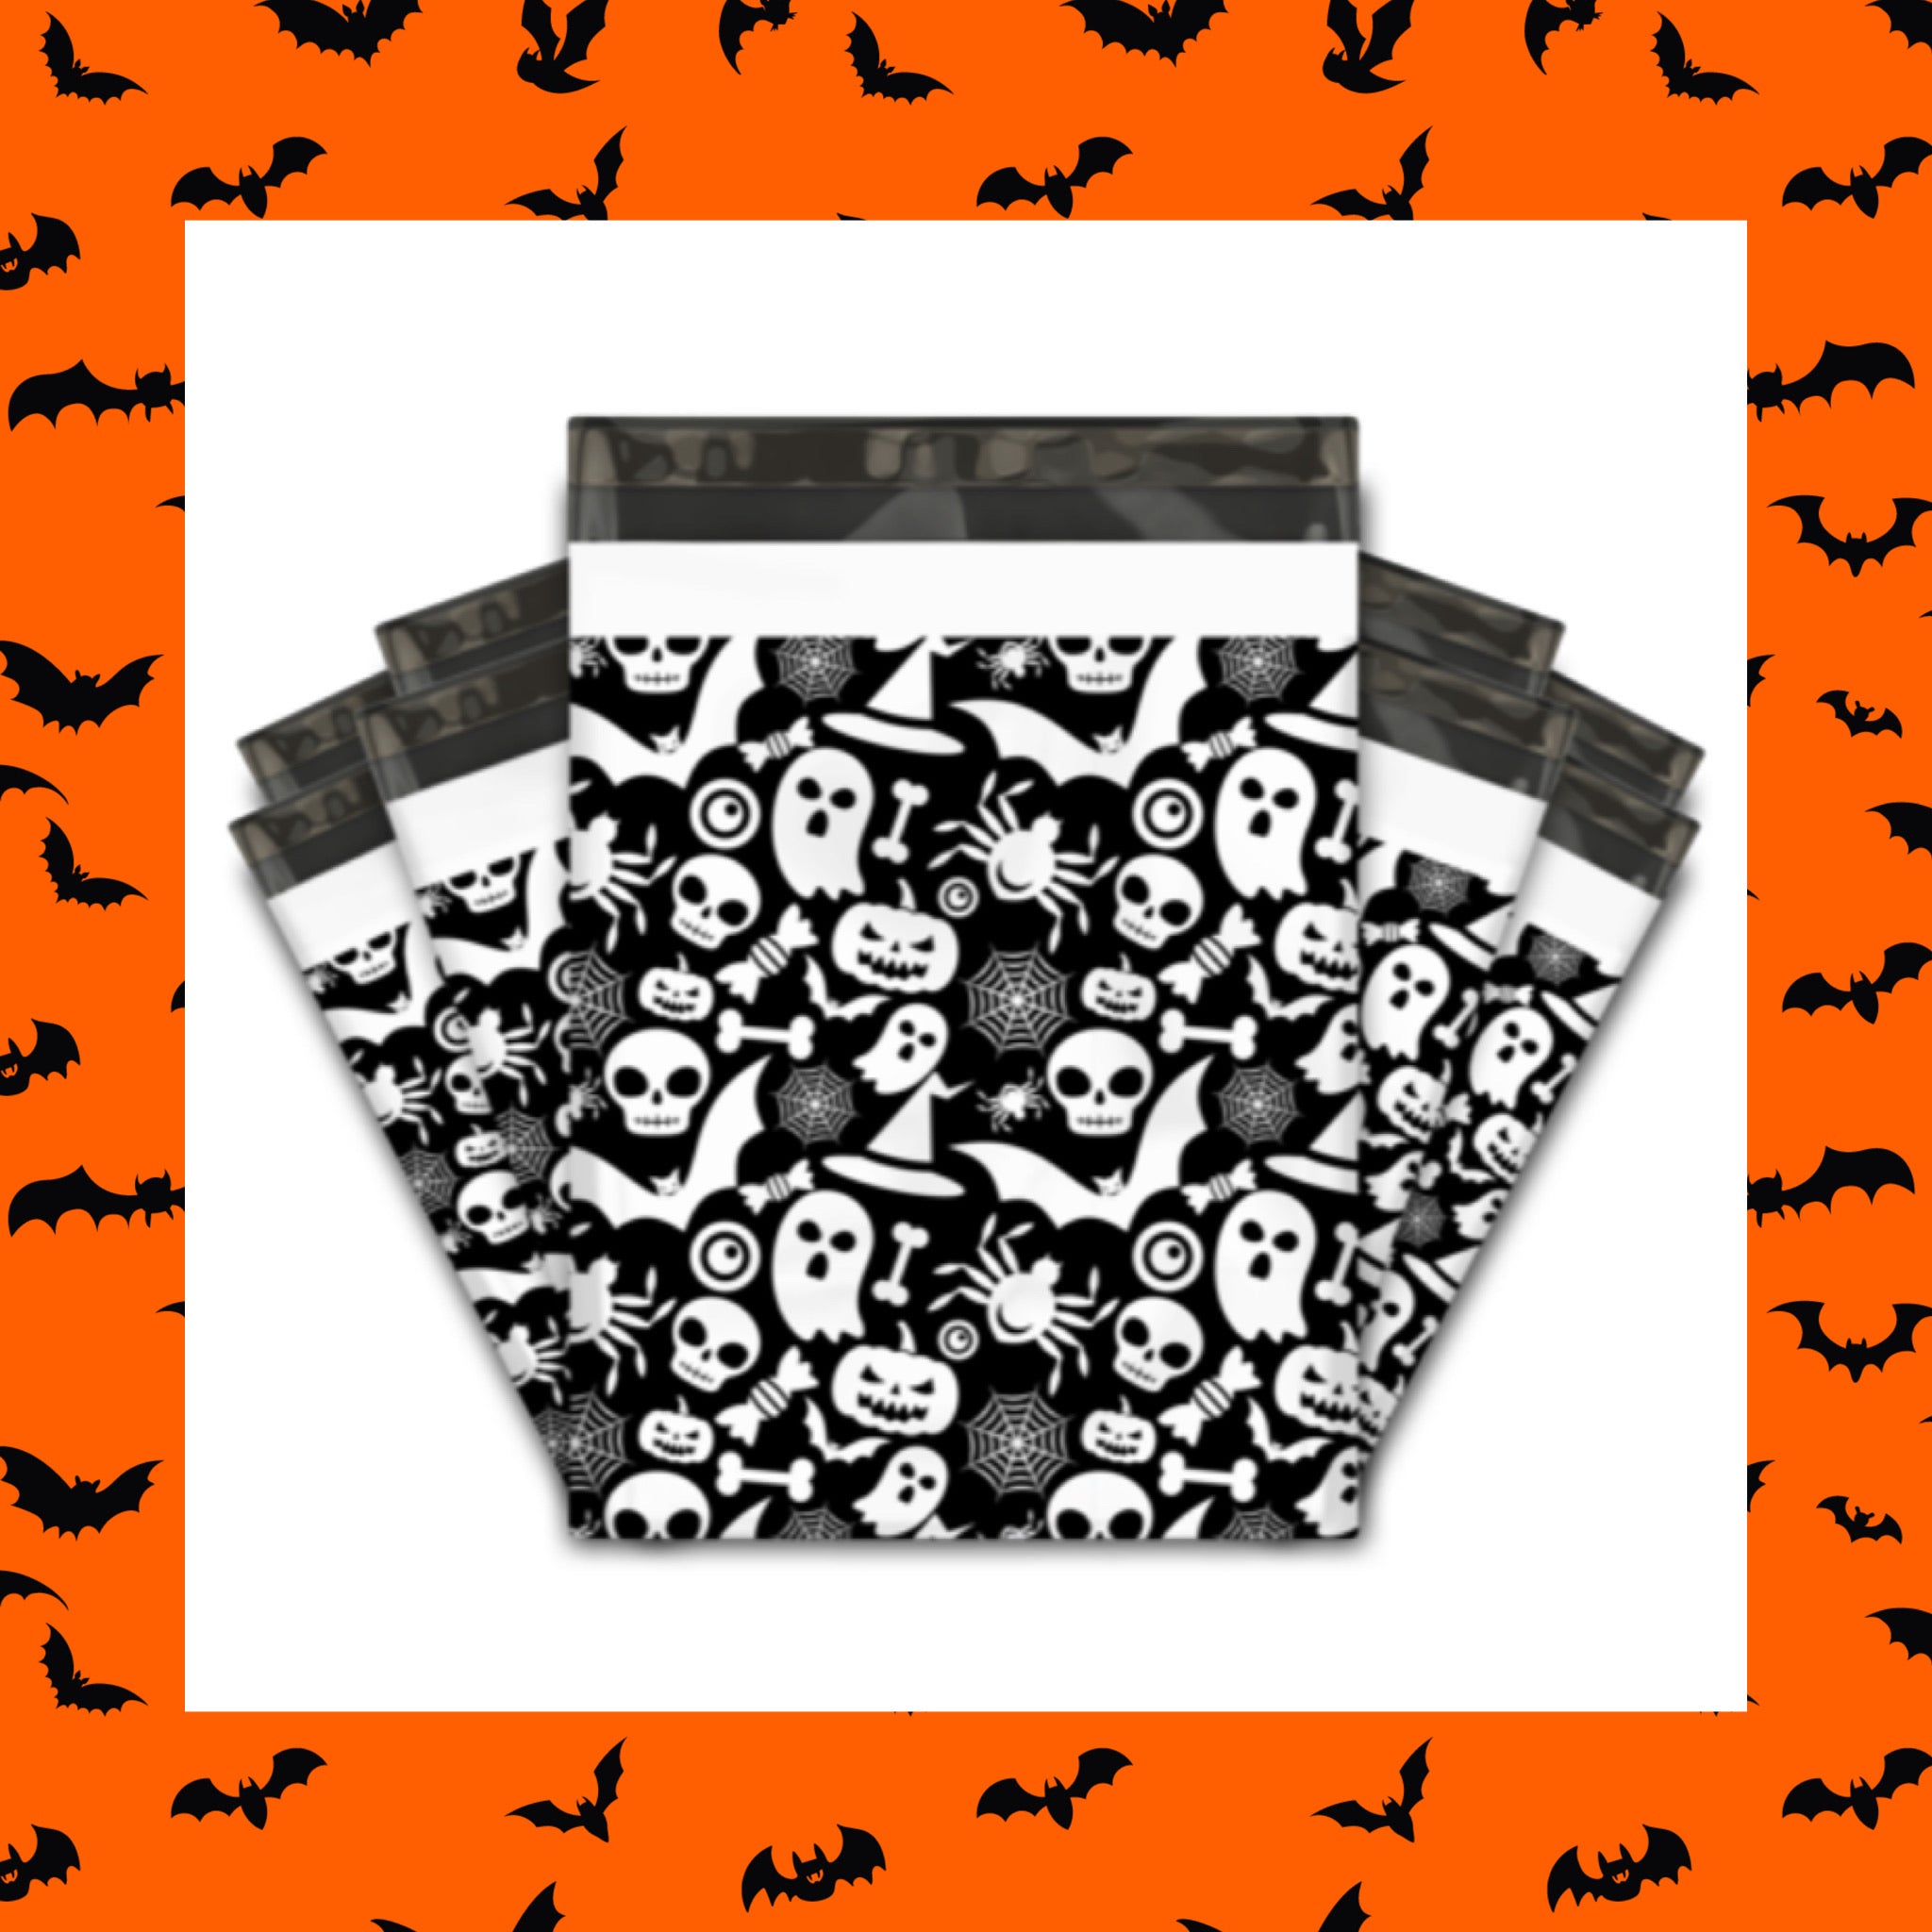 10x13 Black and White All Things Halloween Designer Poly Mailers, Shipping Envelopes, Mailing Envelopes, 20 each